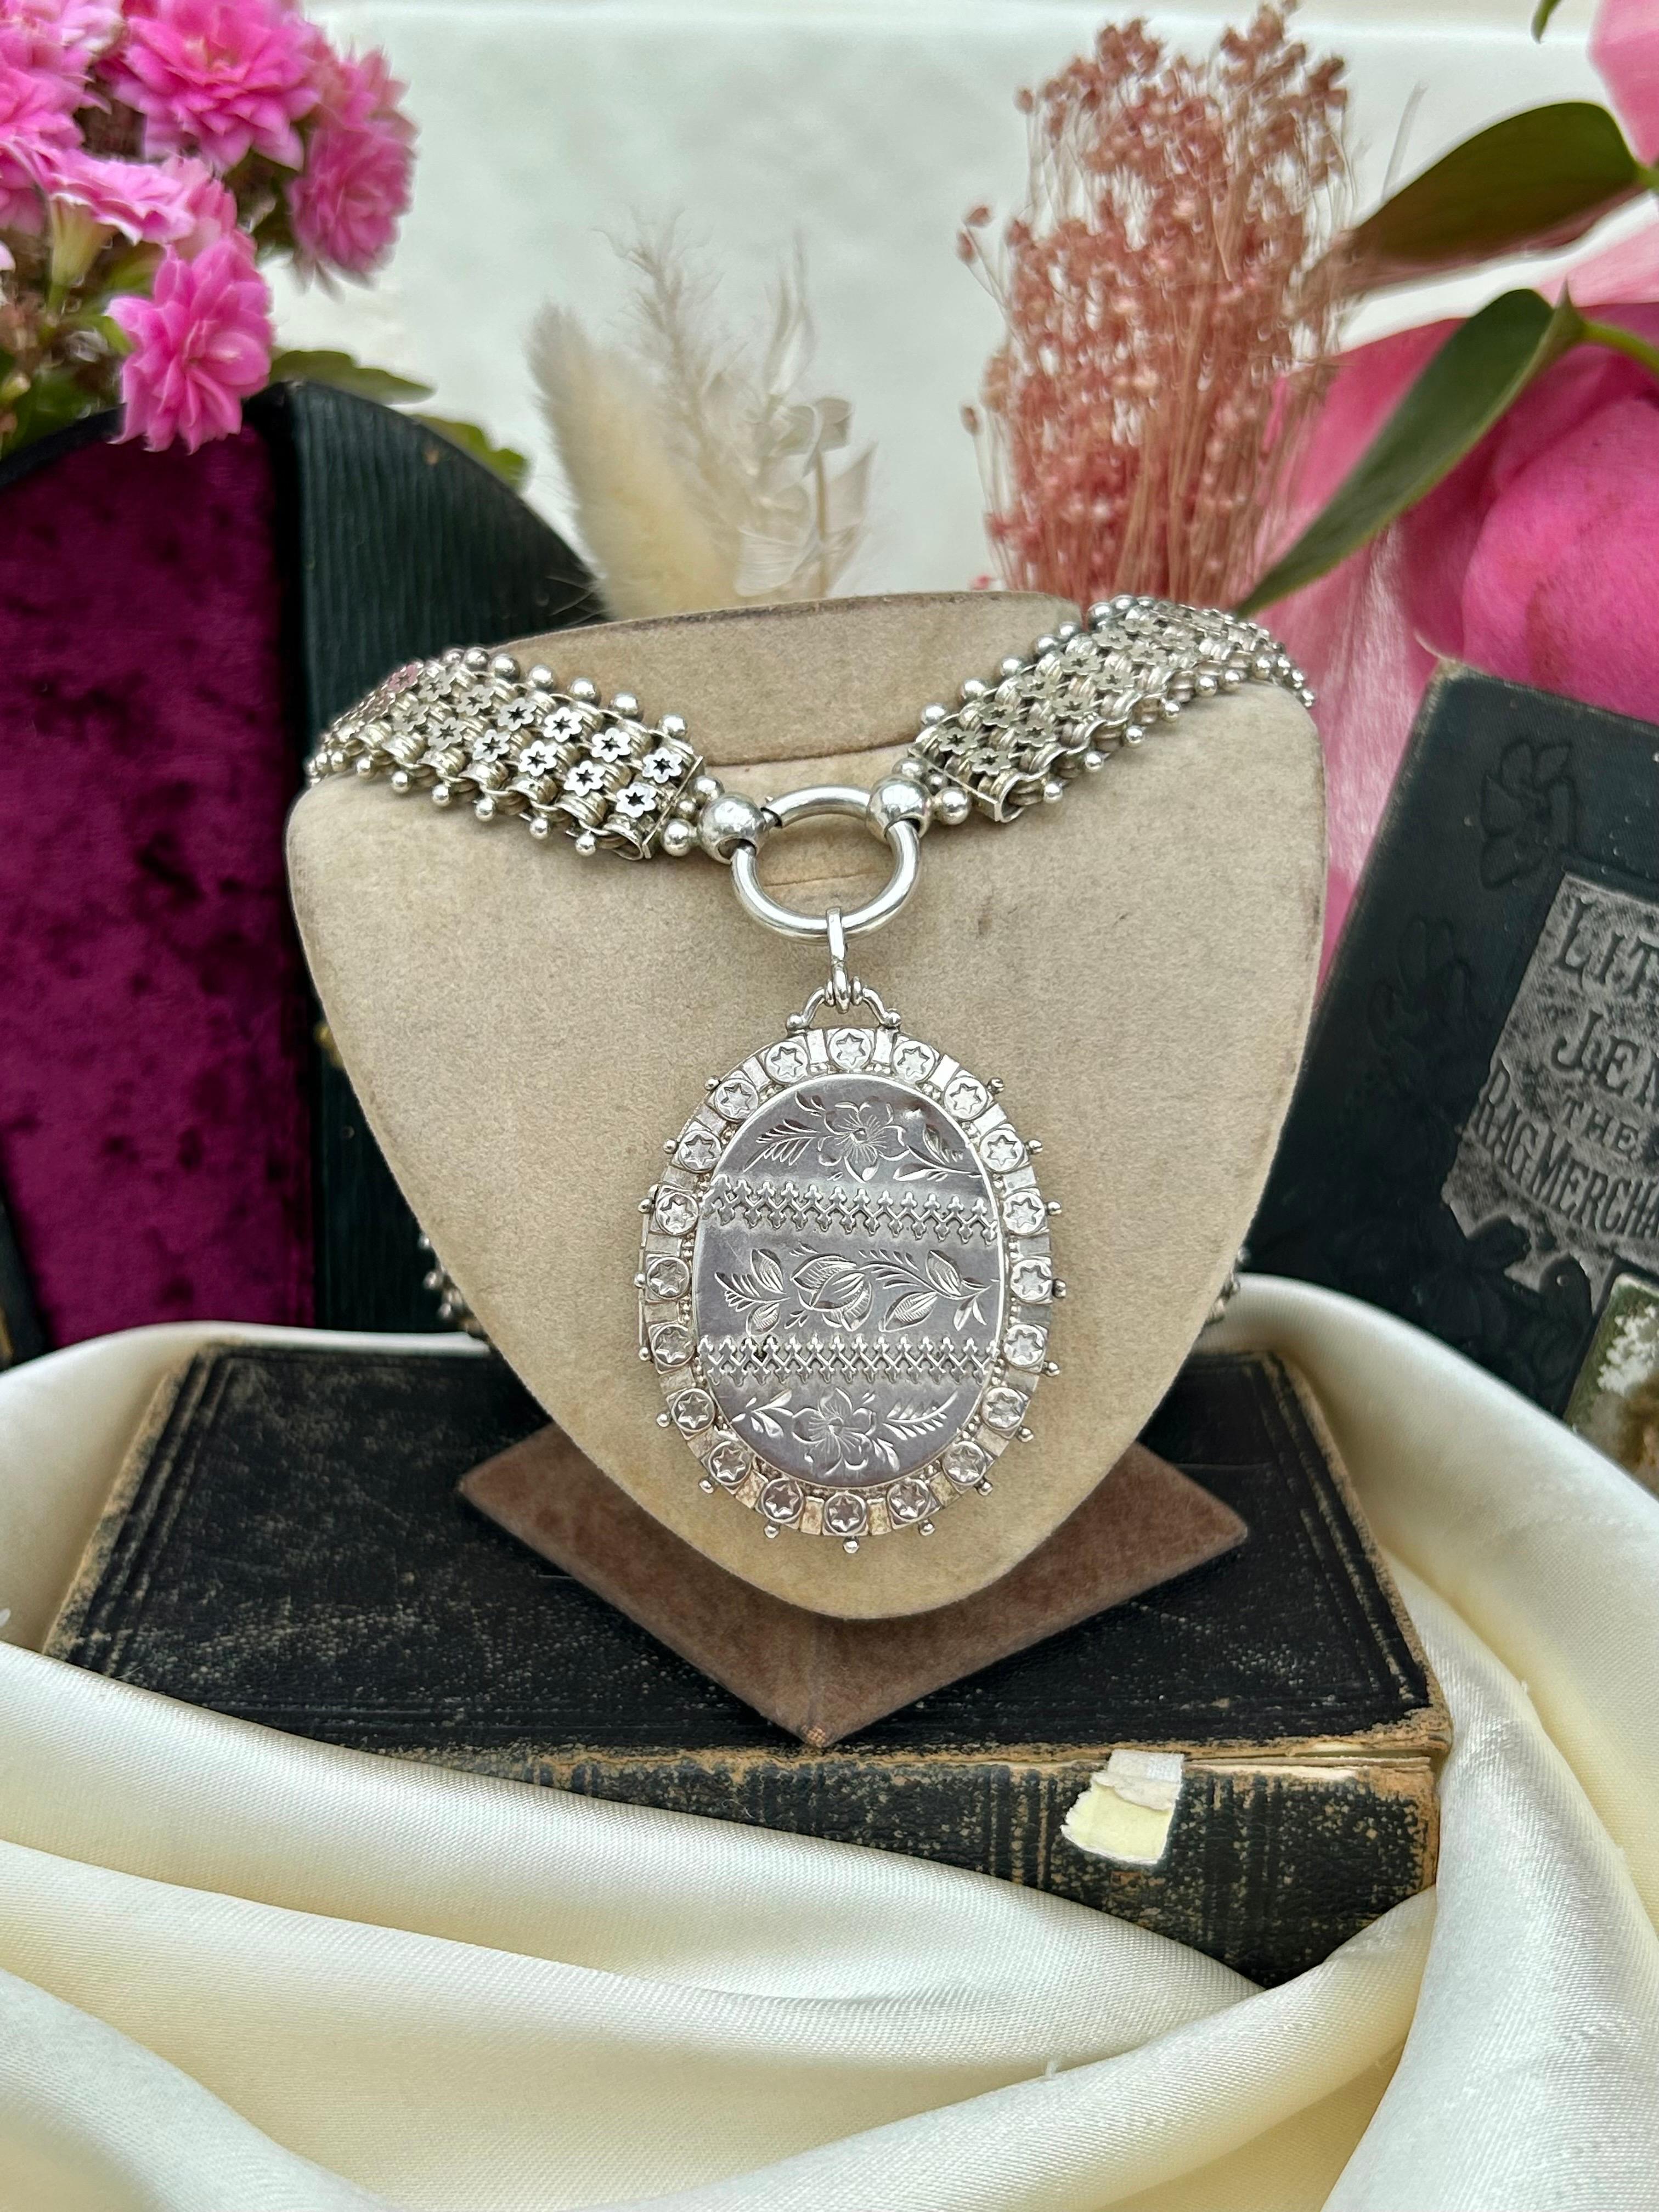 Outstanding Victorian C.1887 Silver Collar with Locket Necklace 

Wonderful flower design chunky collar necklace!!
Open locket!! 

The item comes without the box in the photo but will be presented in a Howard’s Antique gift book

Measurements: